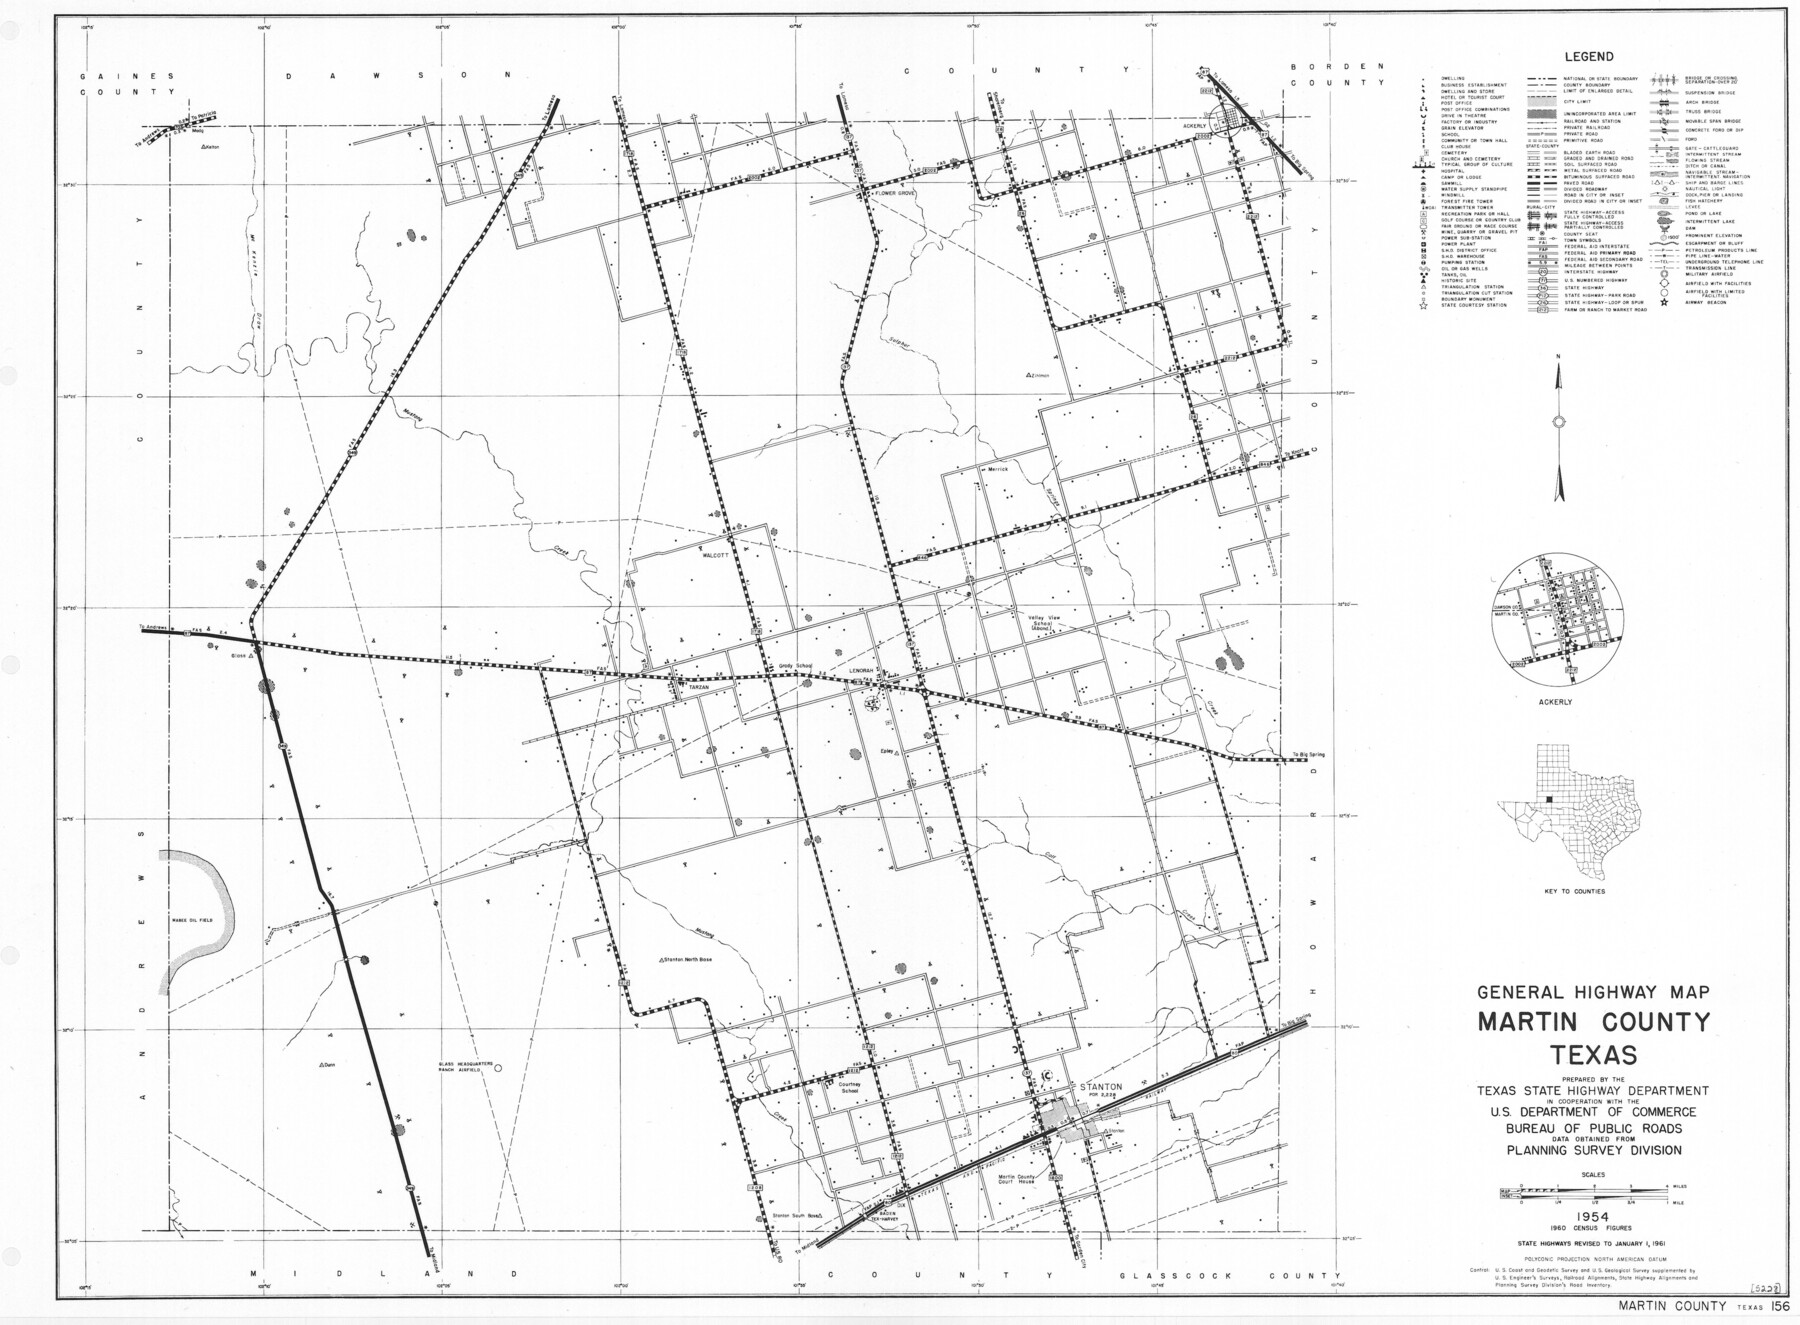 79583, General Highway Map, Martin County, Texas, Texas State Library and Archives